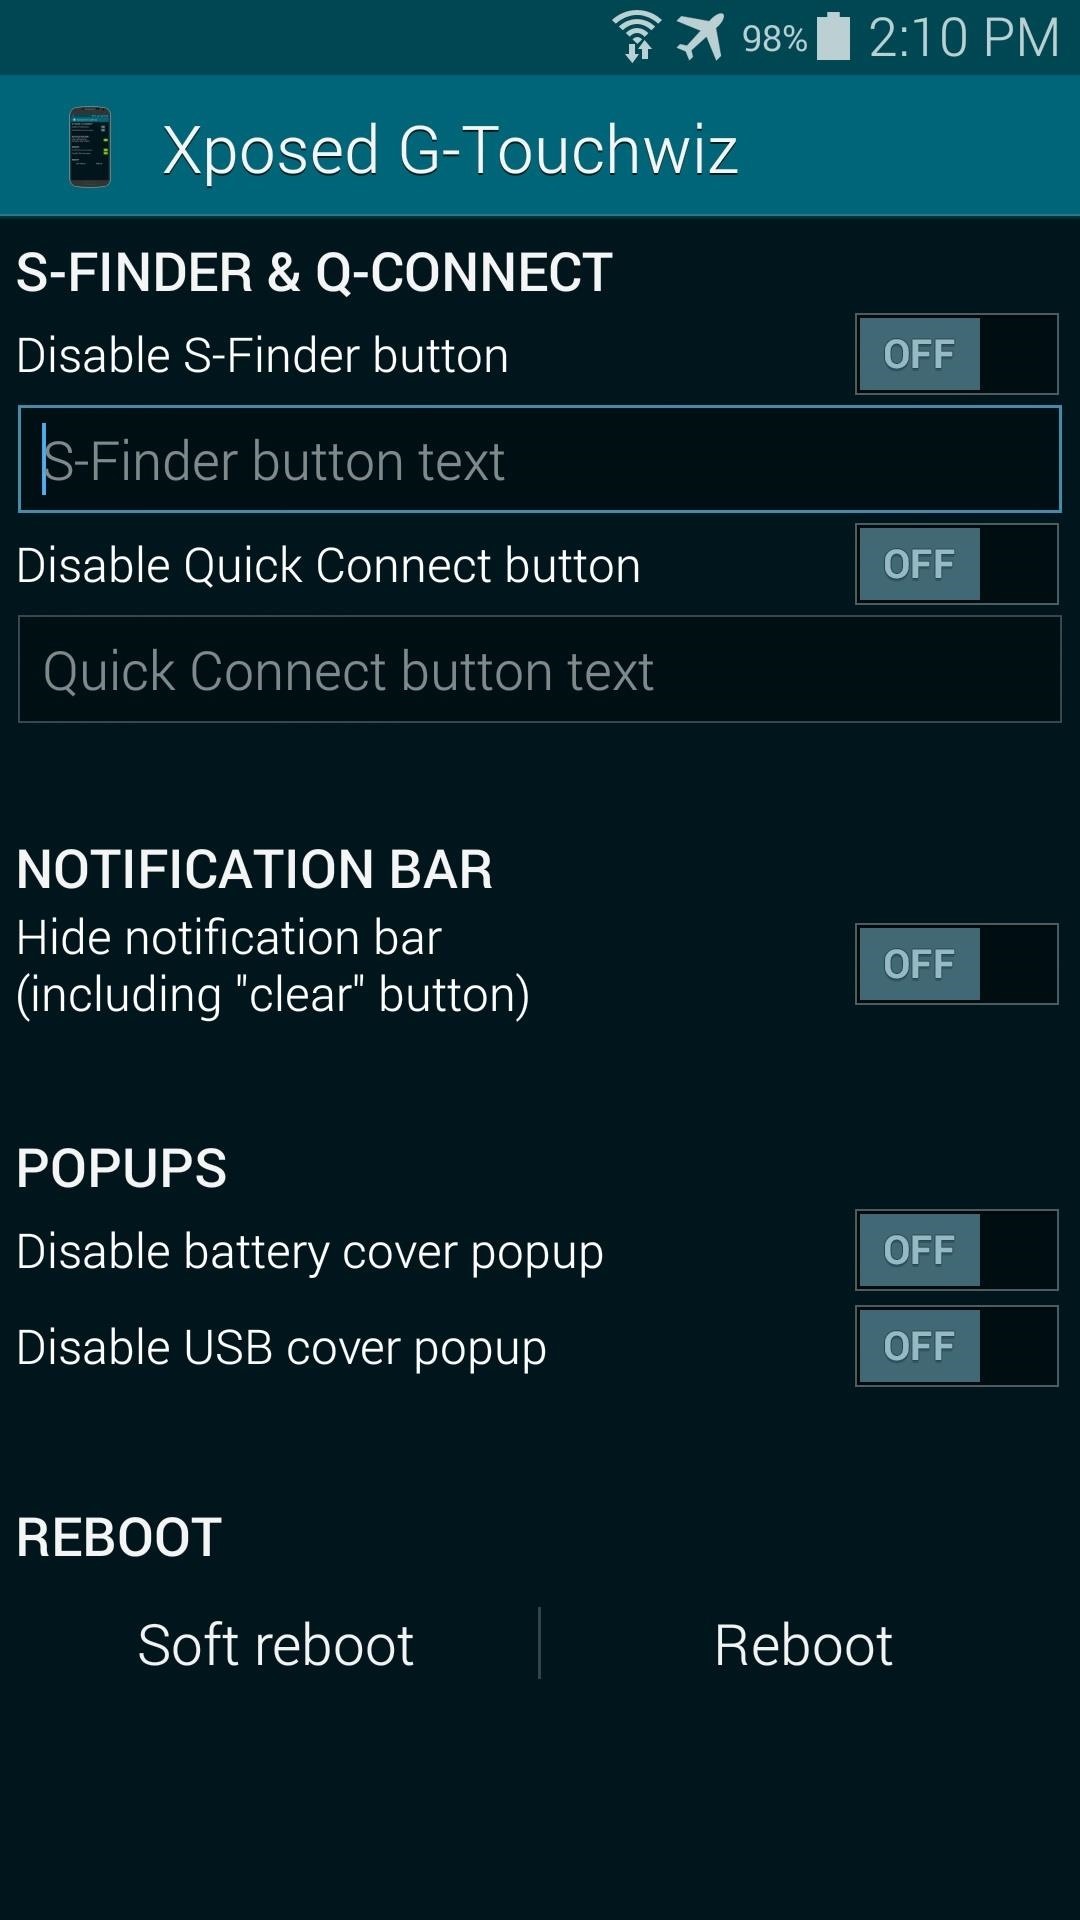 How to Disable Those Annoying "Water Damage" Popup Reminders on Your Galaxy S5